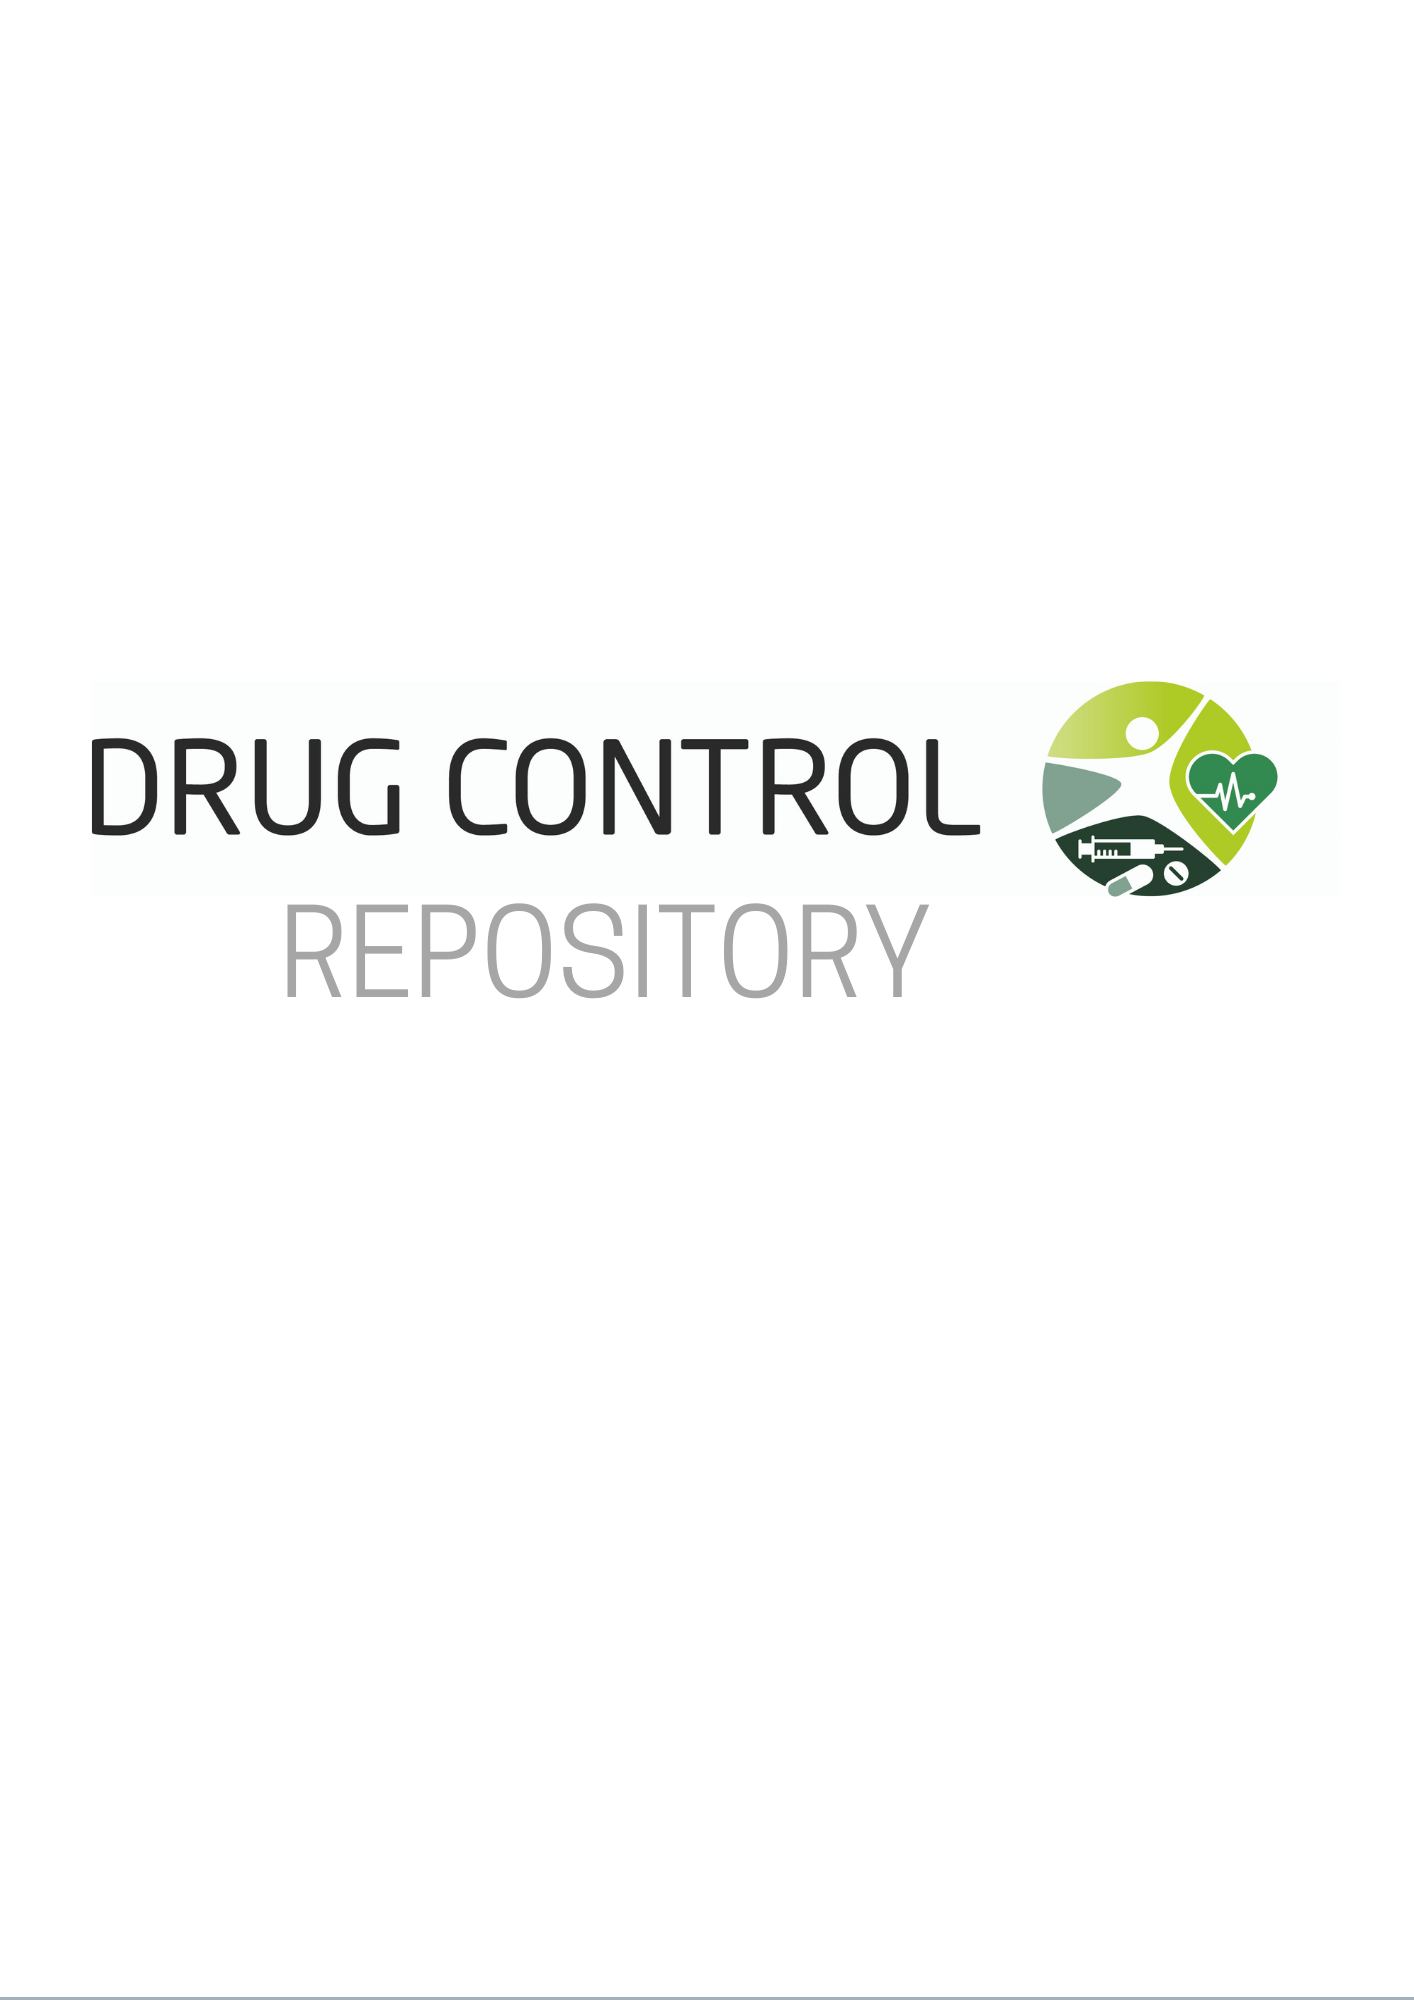 <div style="text-align: center;"><a href="https://sherloc.unodc.org/cld/v3/drugcontrolrepository/#:~:text=The%20Drug%20Control%20Repository%20is,Protocol%2C%20the%20Convention%20on%20Psychotropic">UNODC Drug Control Repository</a></div>